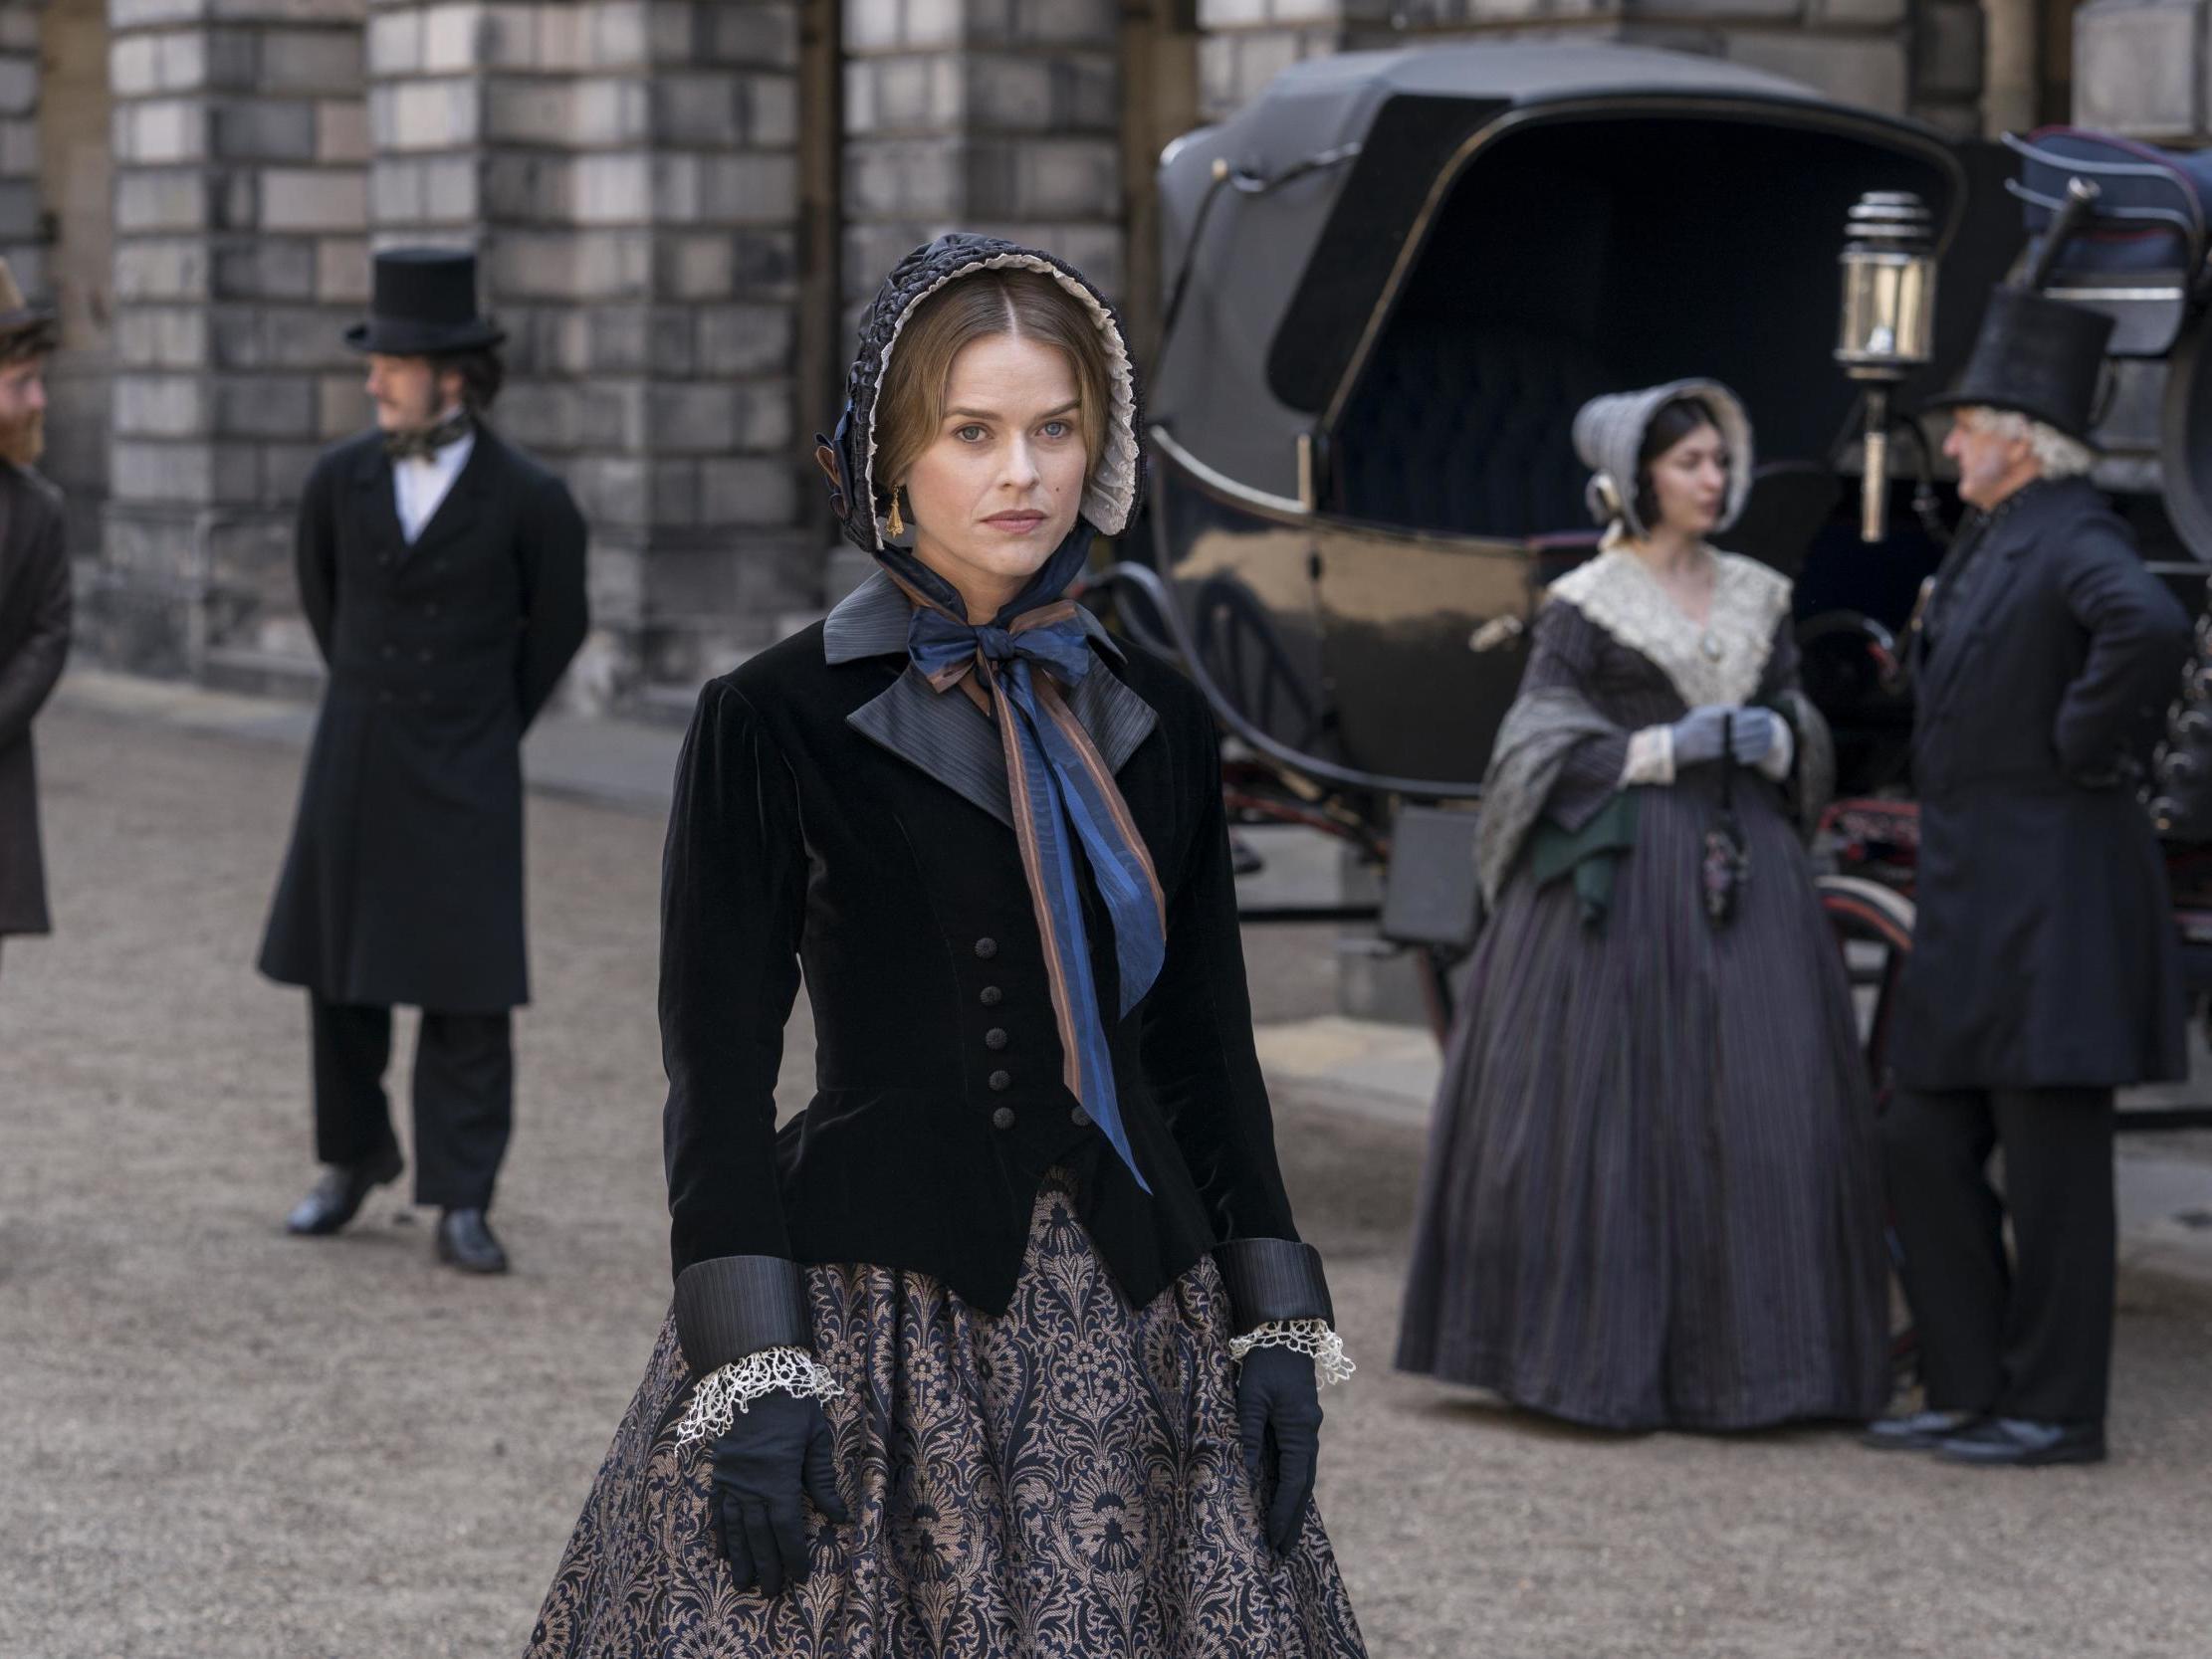 Belgravia episode 6 review: Julian Fellowes' witless ITV drama pales in comparison to Quiz